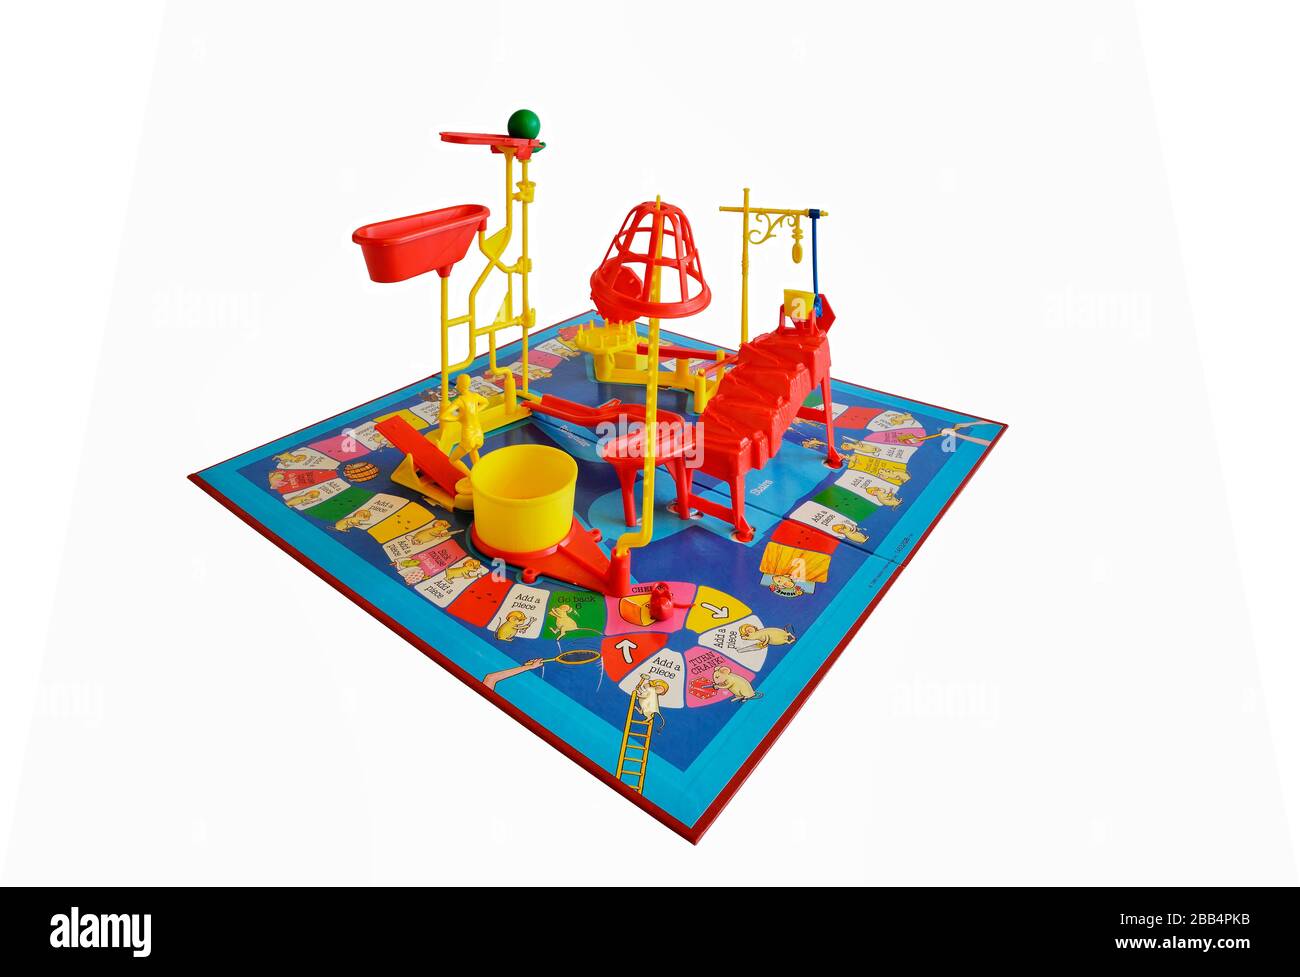 https://c8.alamy.com/comp/2BB4PKB/mouse-trap-game-mousetrap-board-game-2BB4PKB.jpg